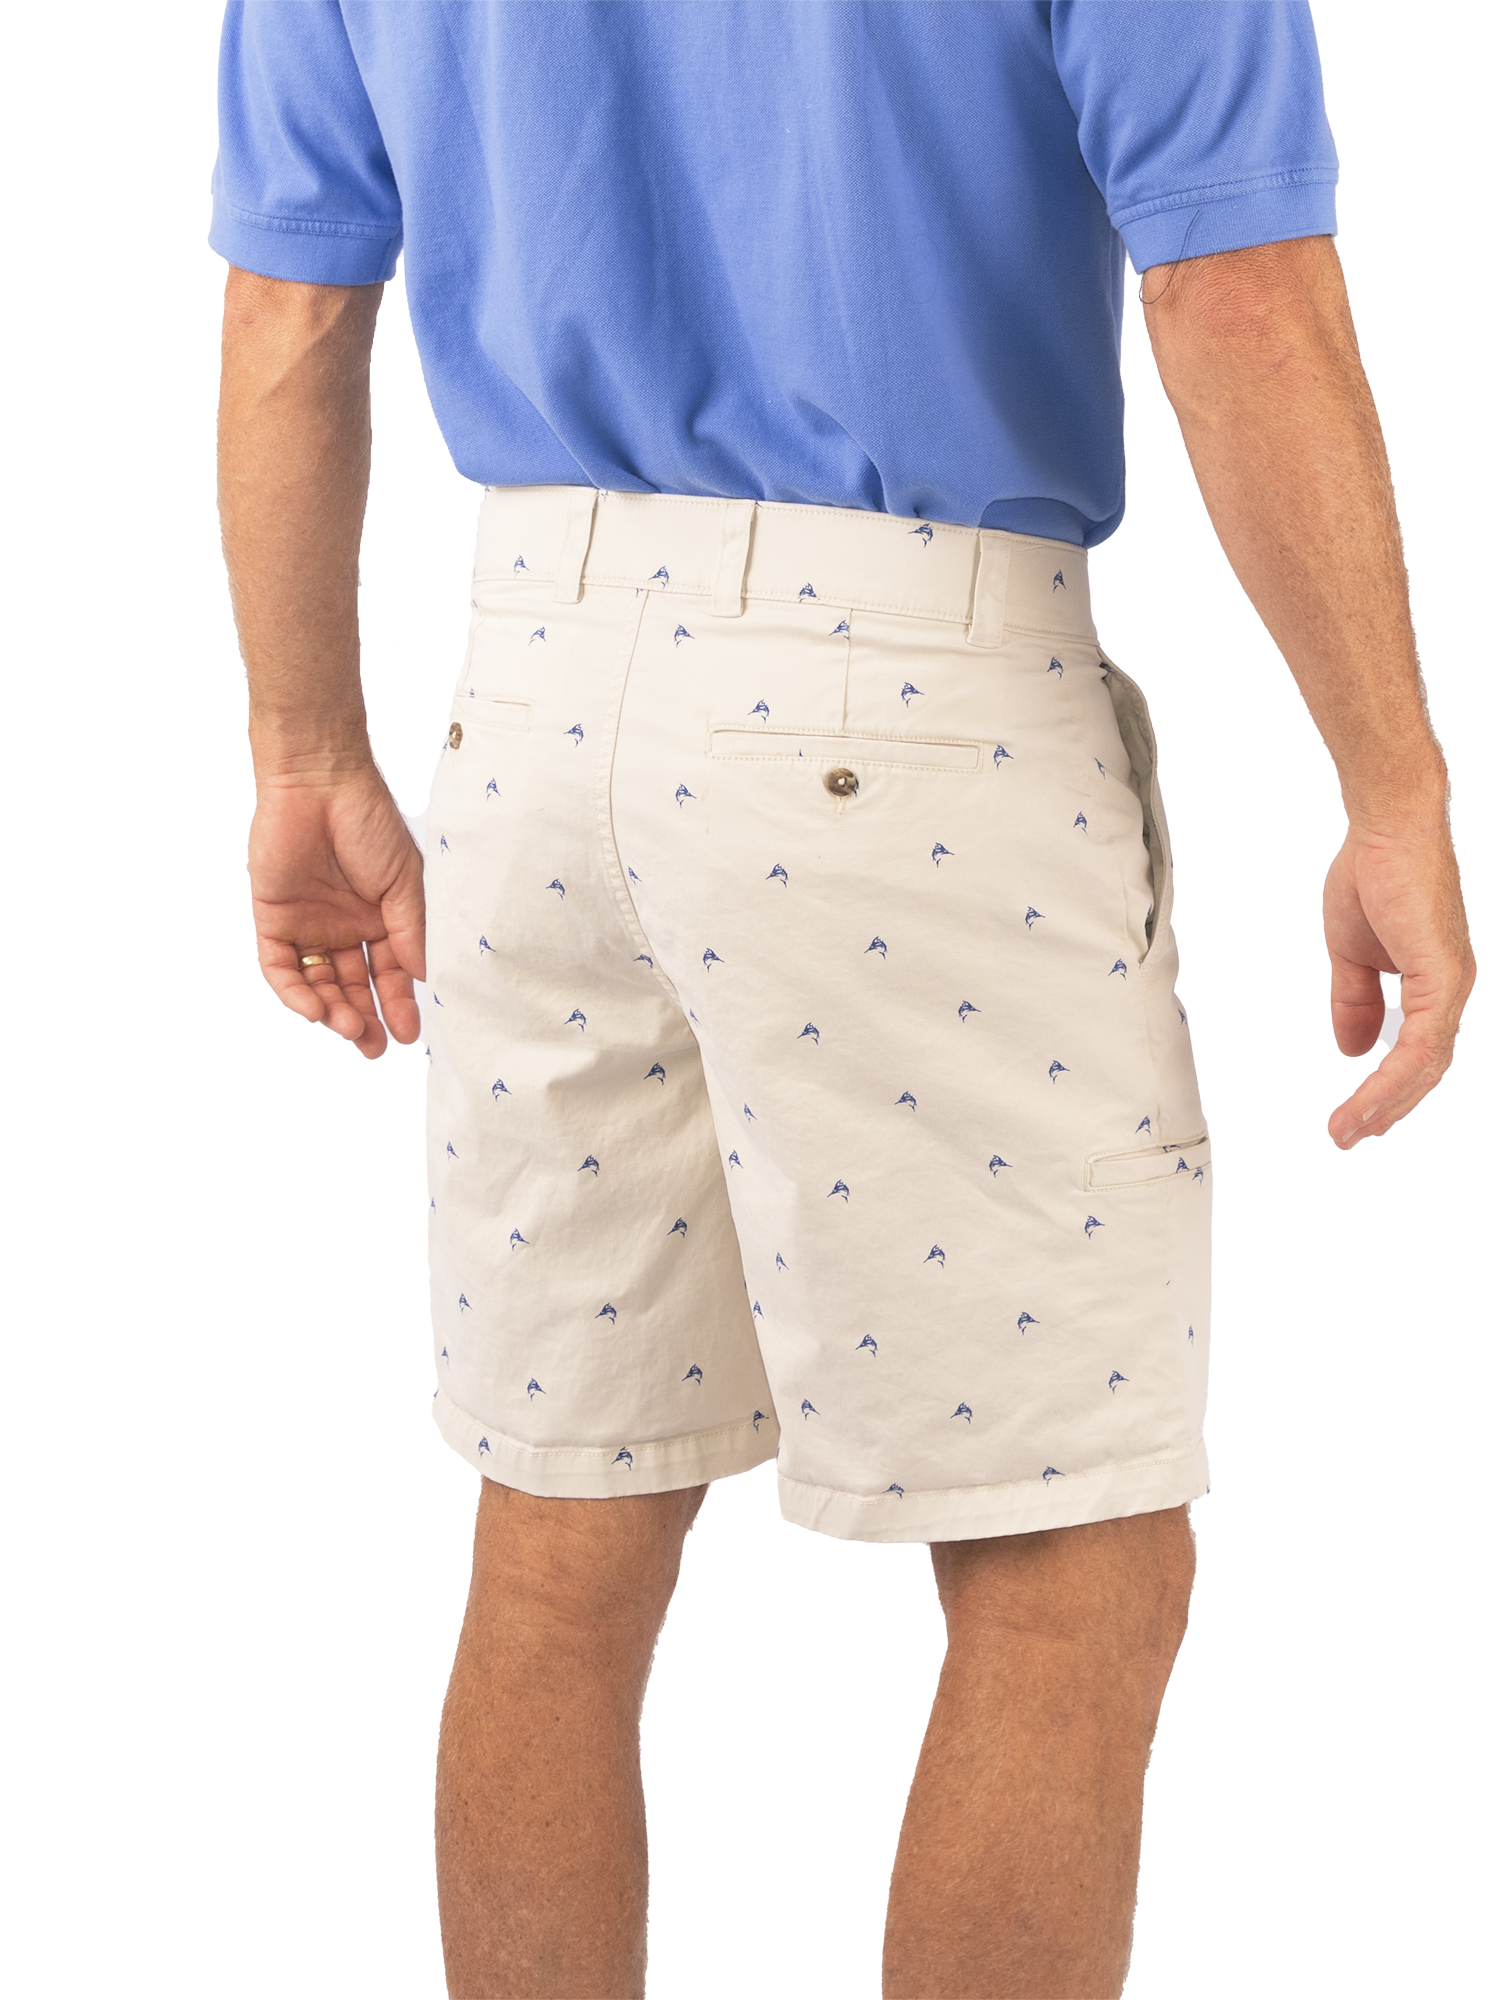 Bimini Bay Outfitters All Ports Men's Casual Shorts